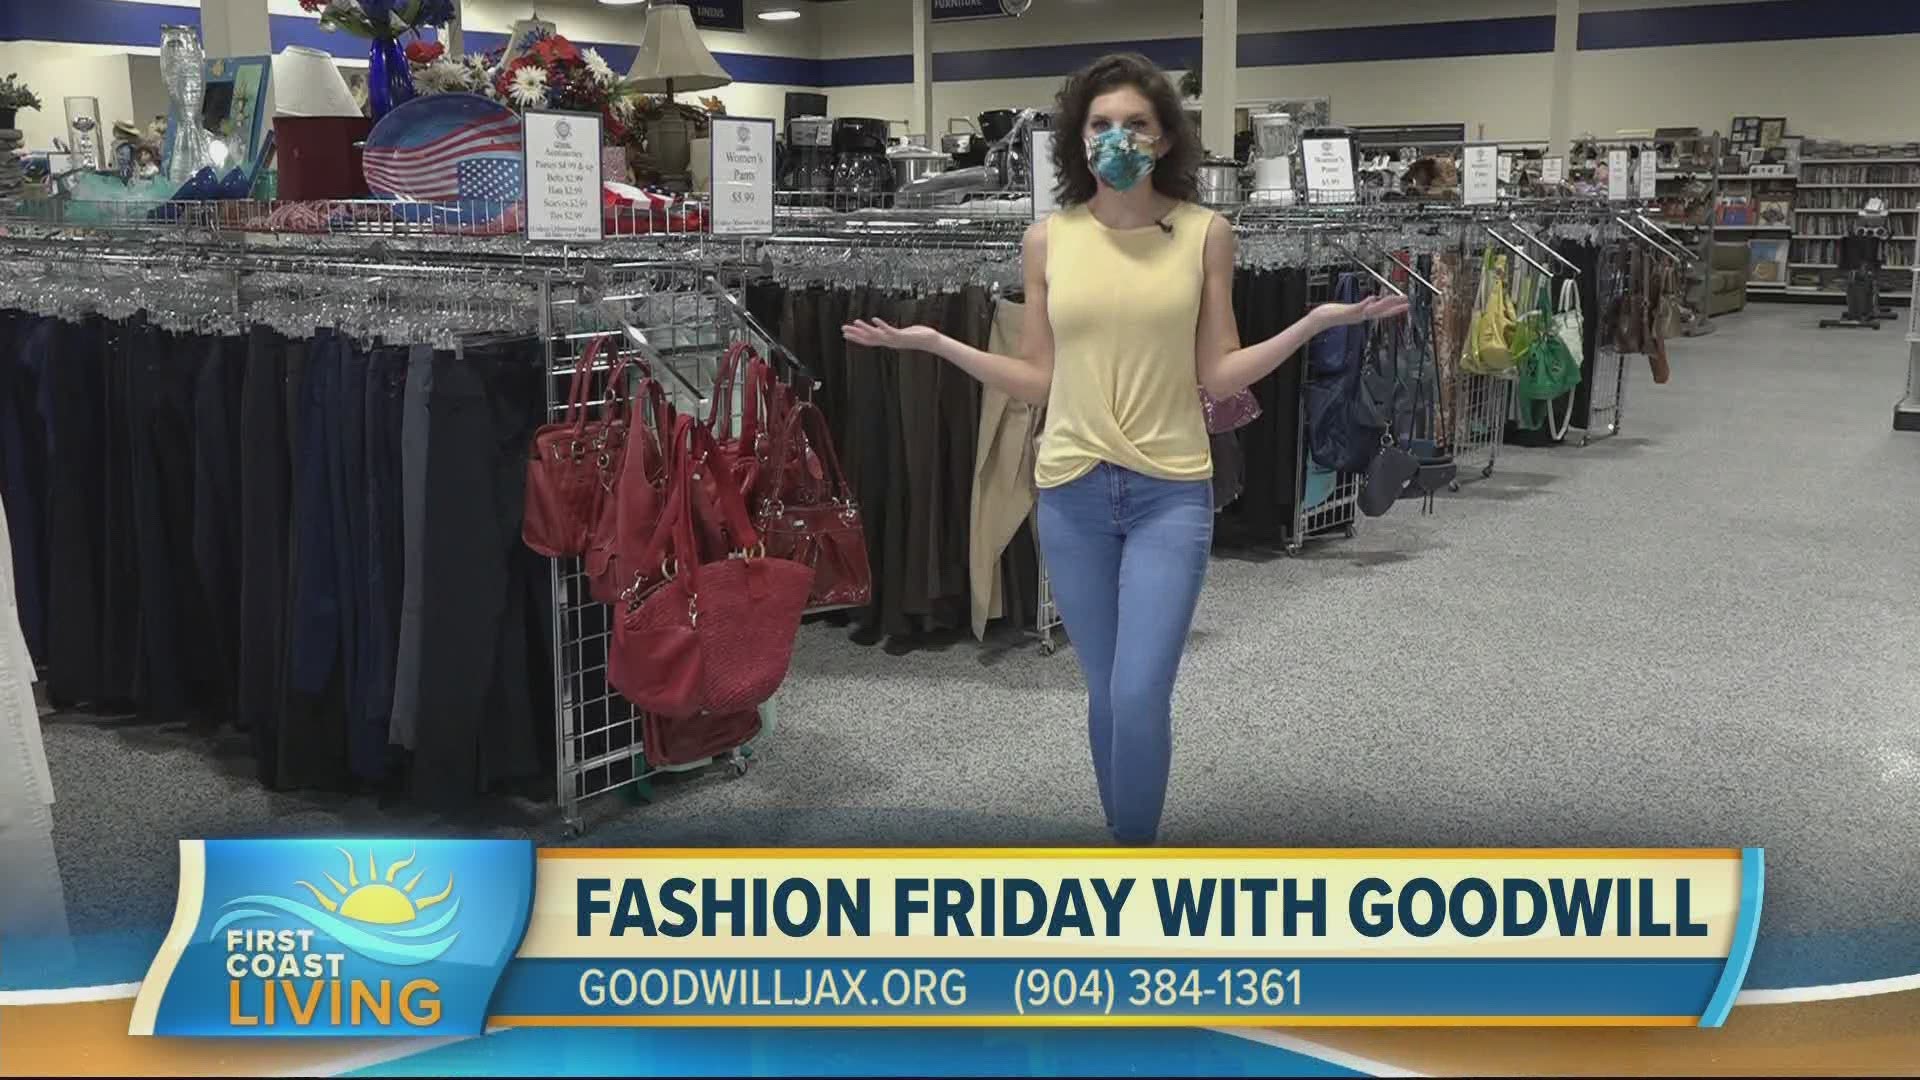 Fashion Friday brightens up your wardrobe at Goodwill!